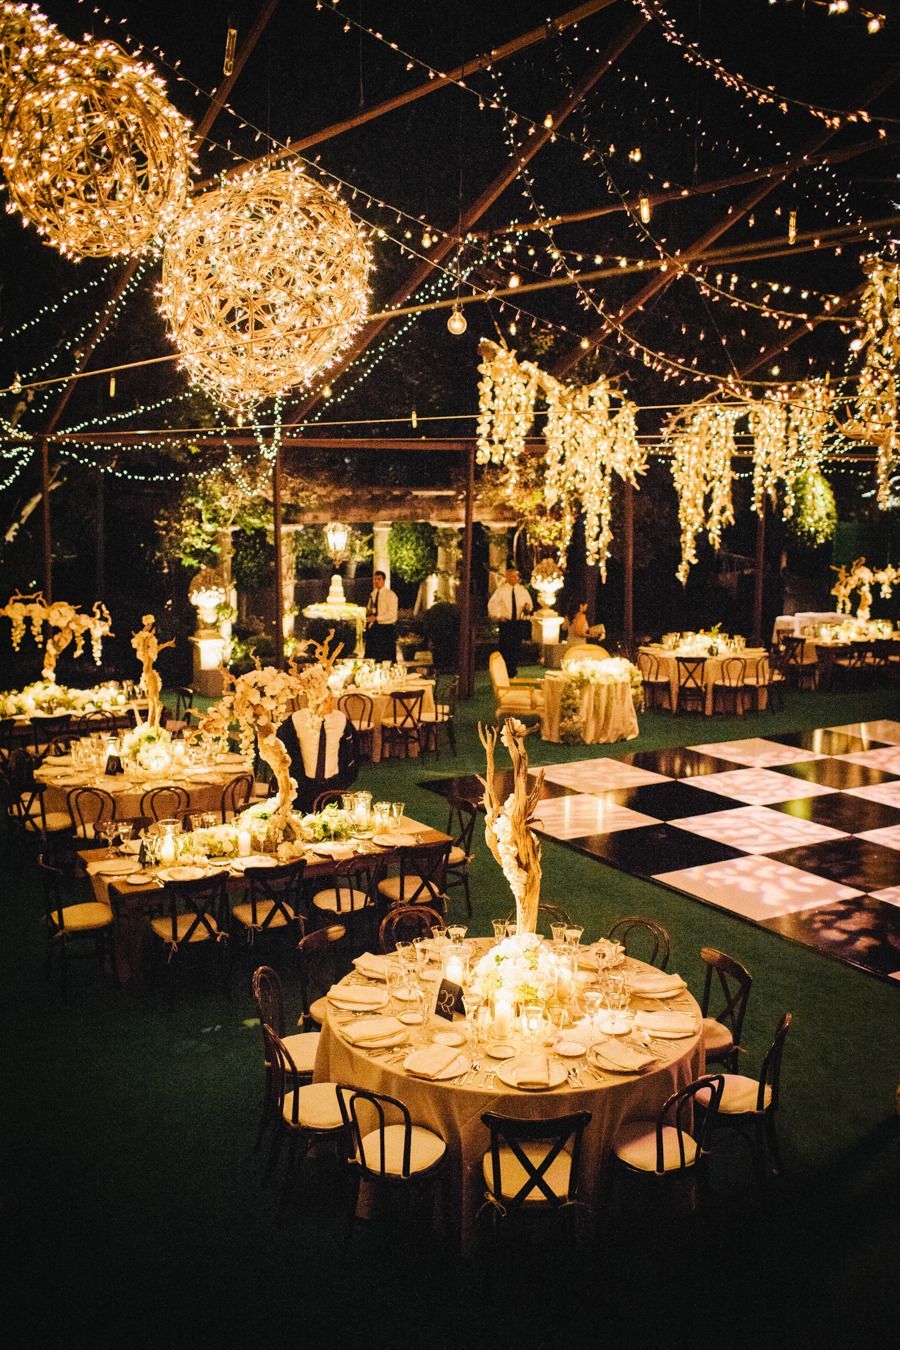 Gorgeous Event Lighting. Love the balls of string lights! Perfect for a glam or gatsby wedding theme.